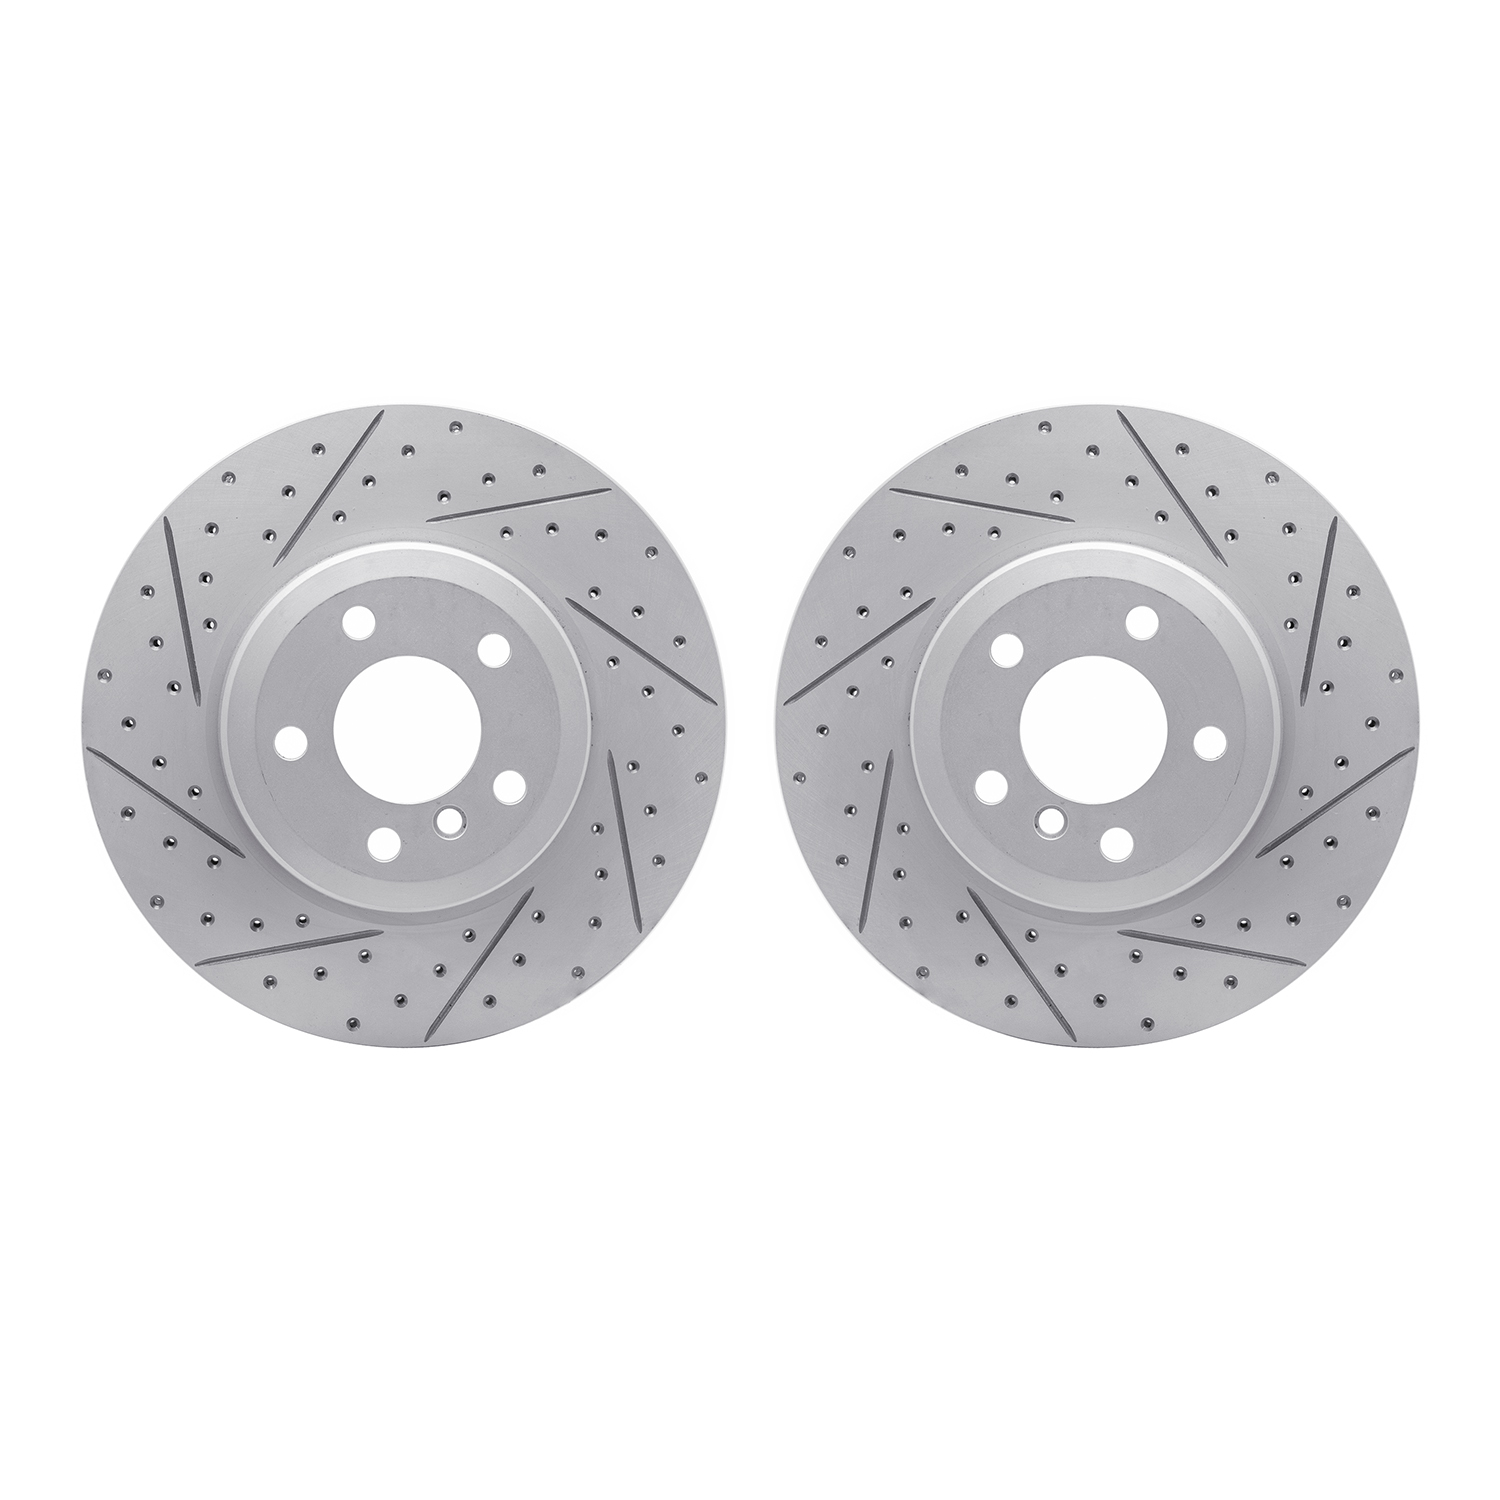 2002-31095 Geoperformance Drilled/Slotted Brake Rotors, 2007-2019 BMW, Position: Rear